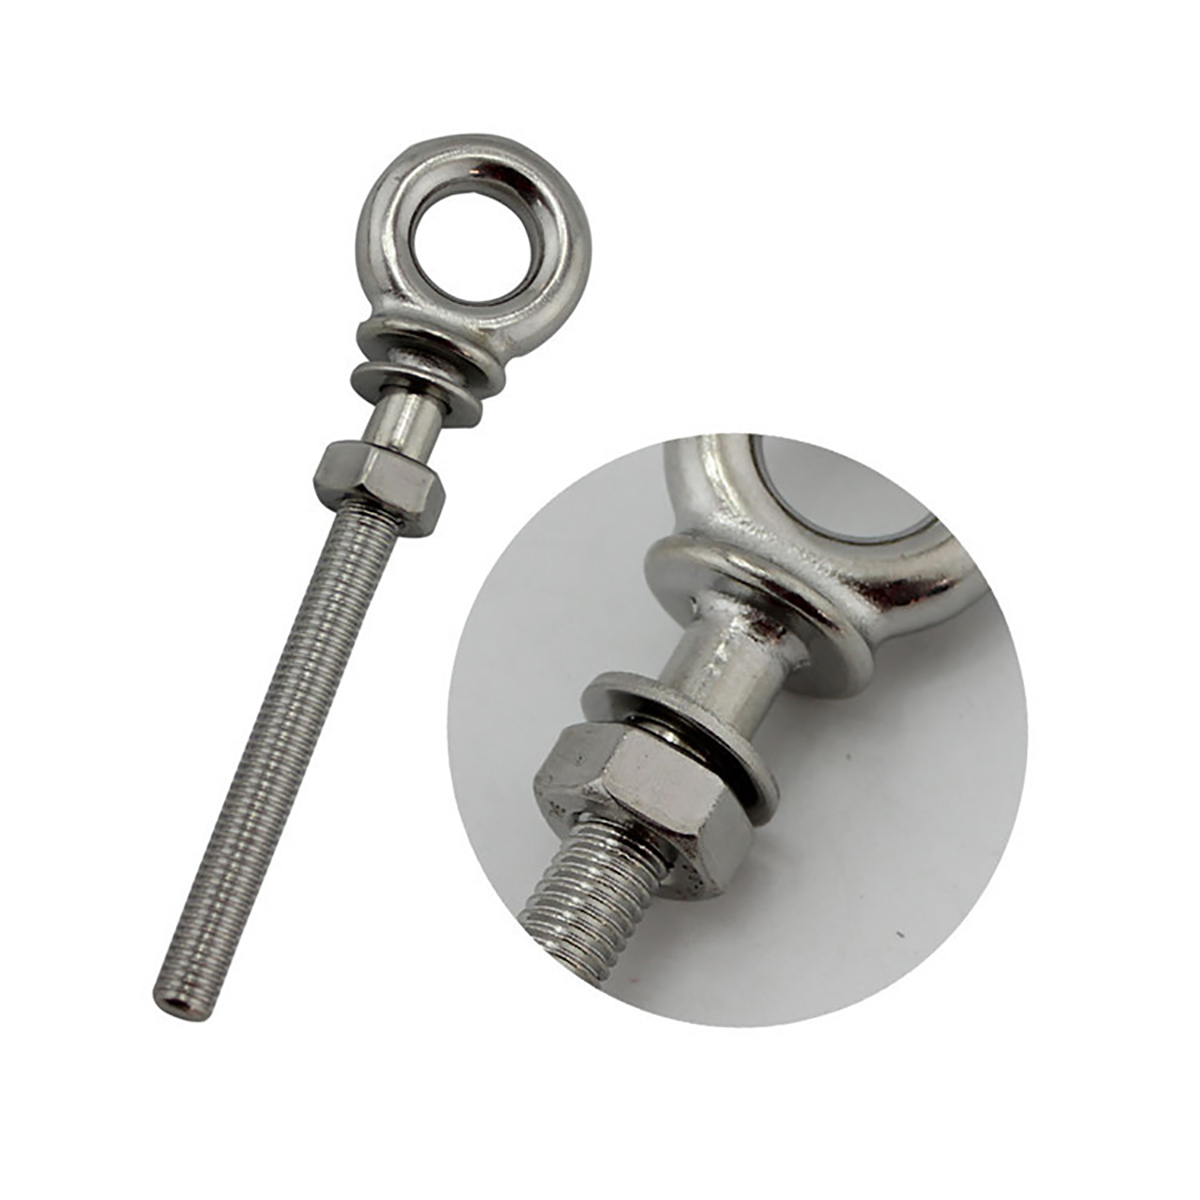 Stainless-Steel-Marine-Grade-Lifting-Eye-Bolts-Long-Shank-Nut-amp-Washer-M8x80mm-1533395